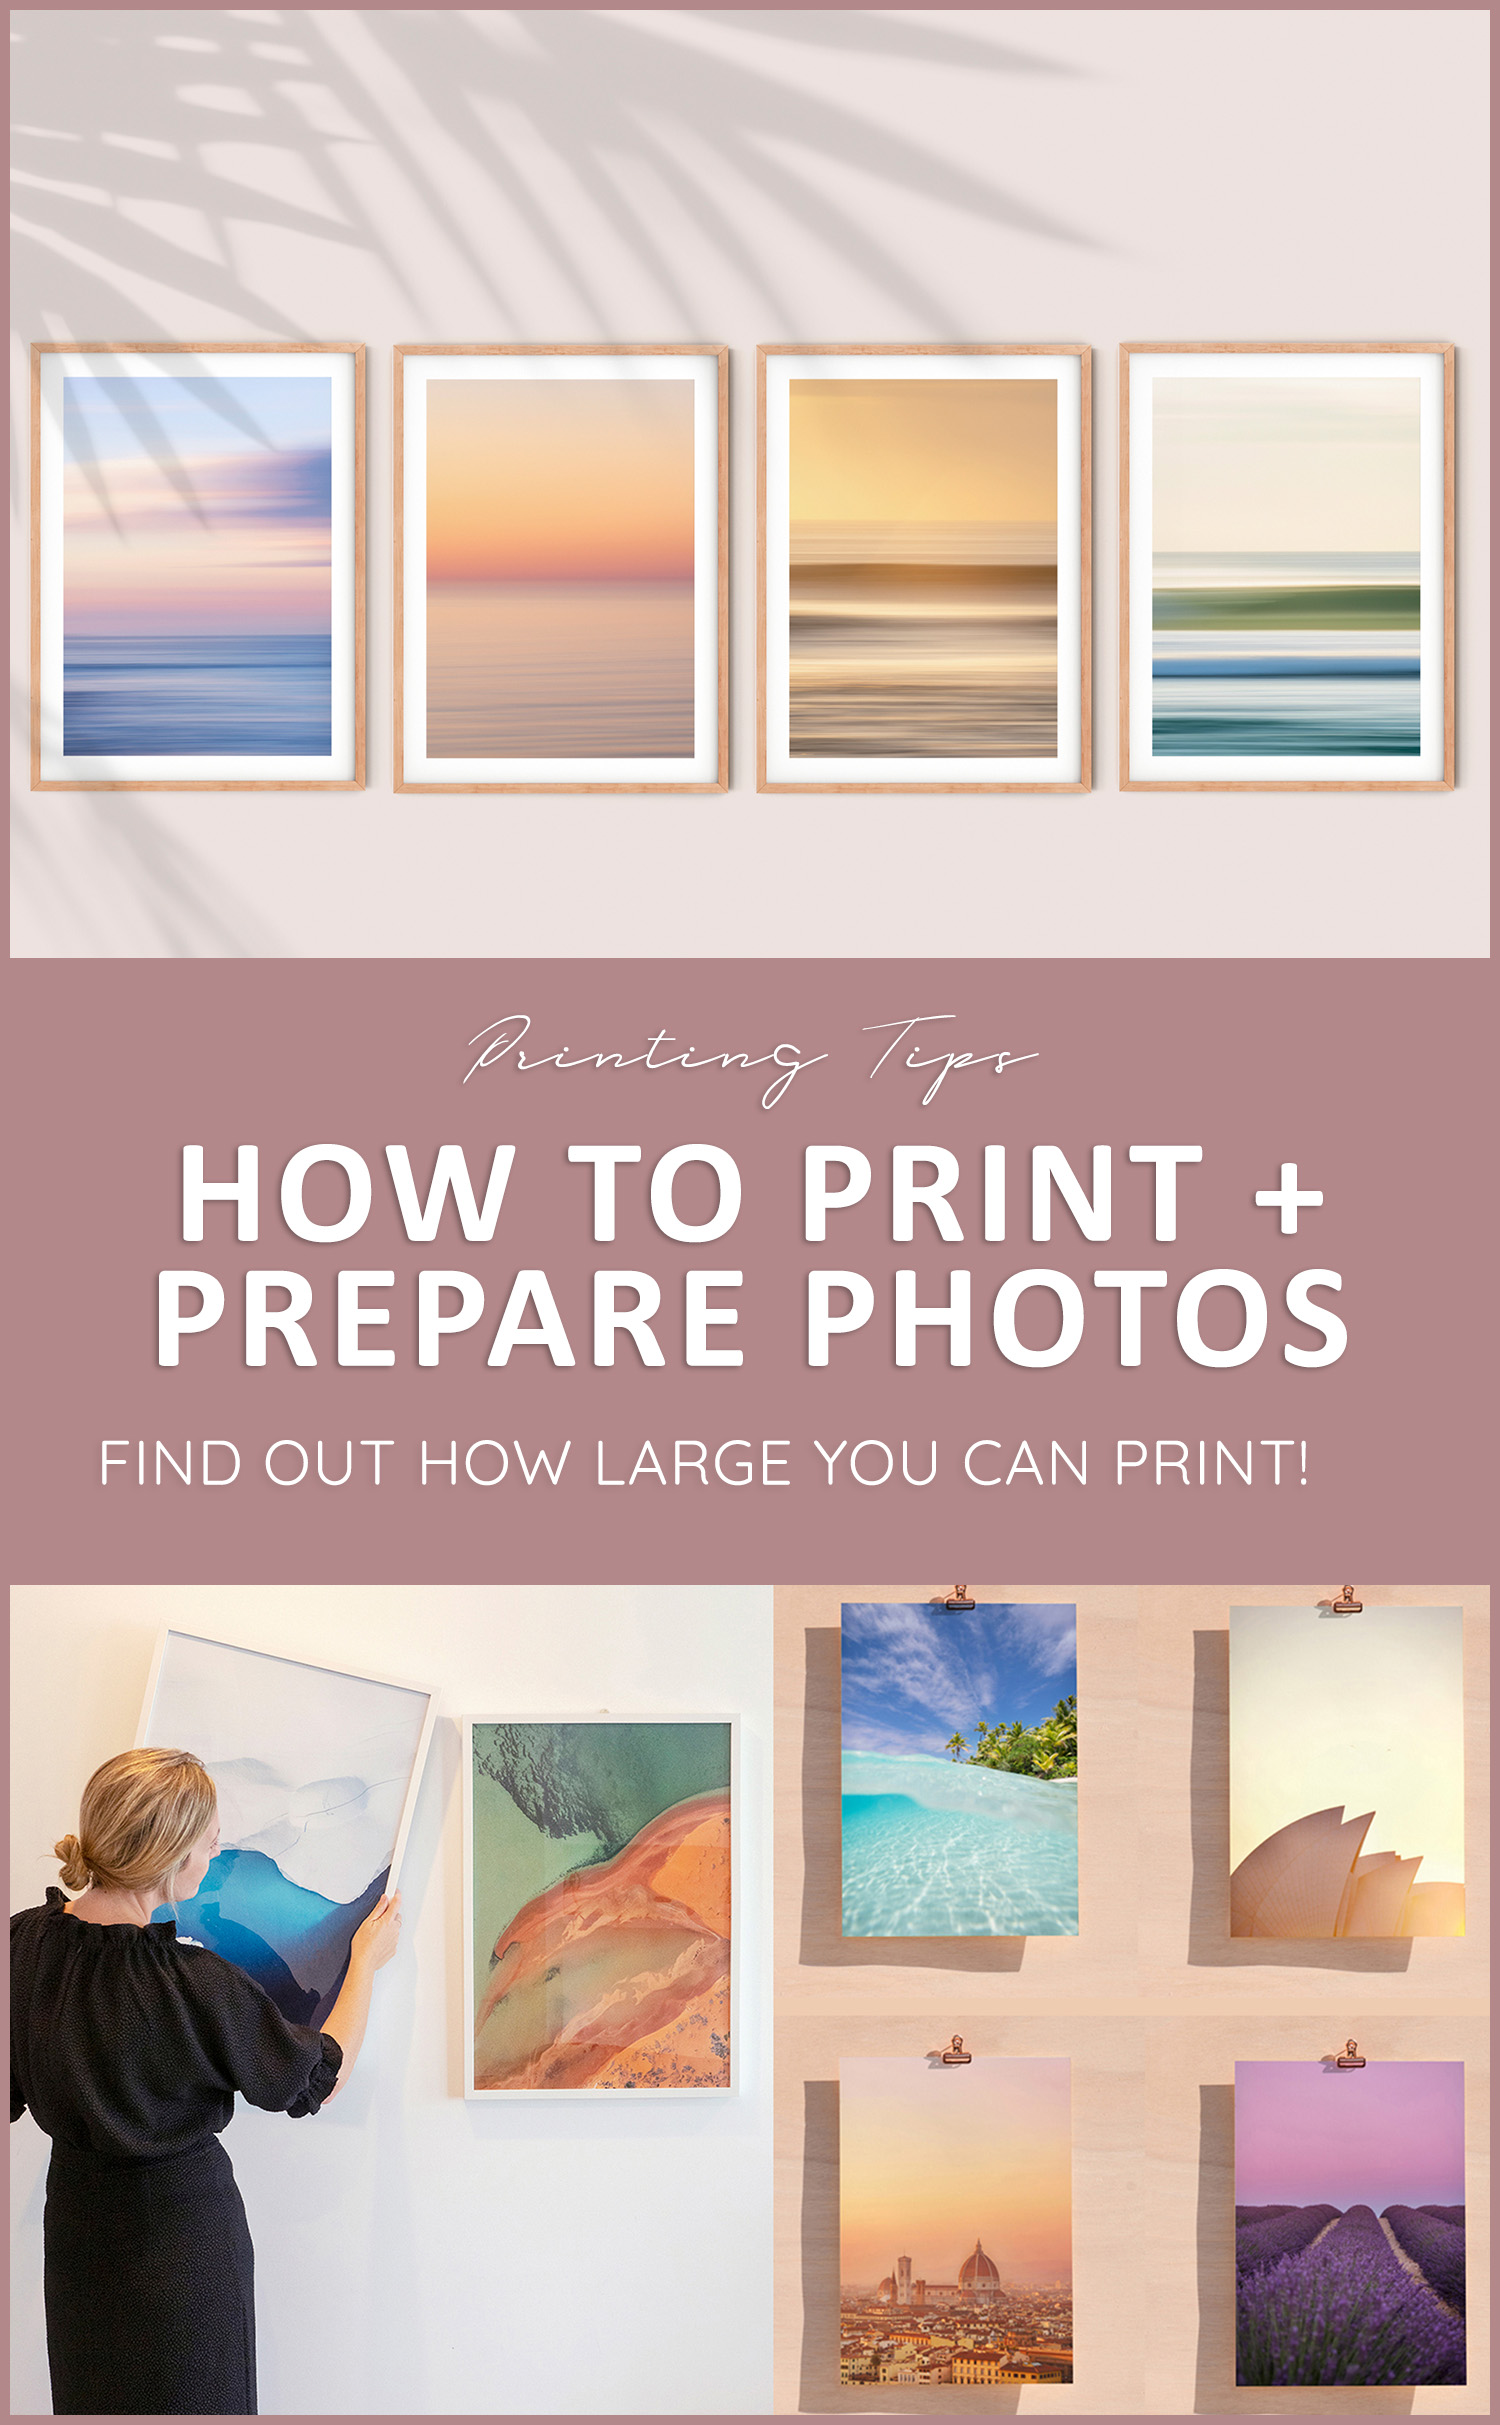 How to print photos, preparing your phone photos and printing enlargements